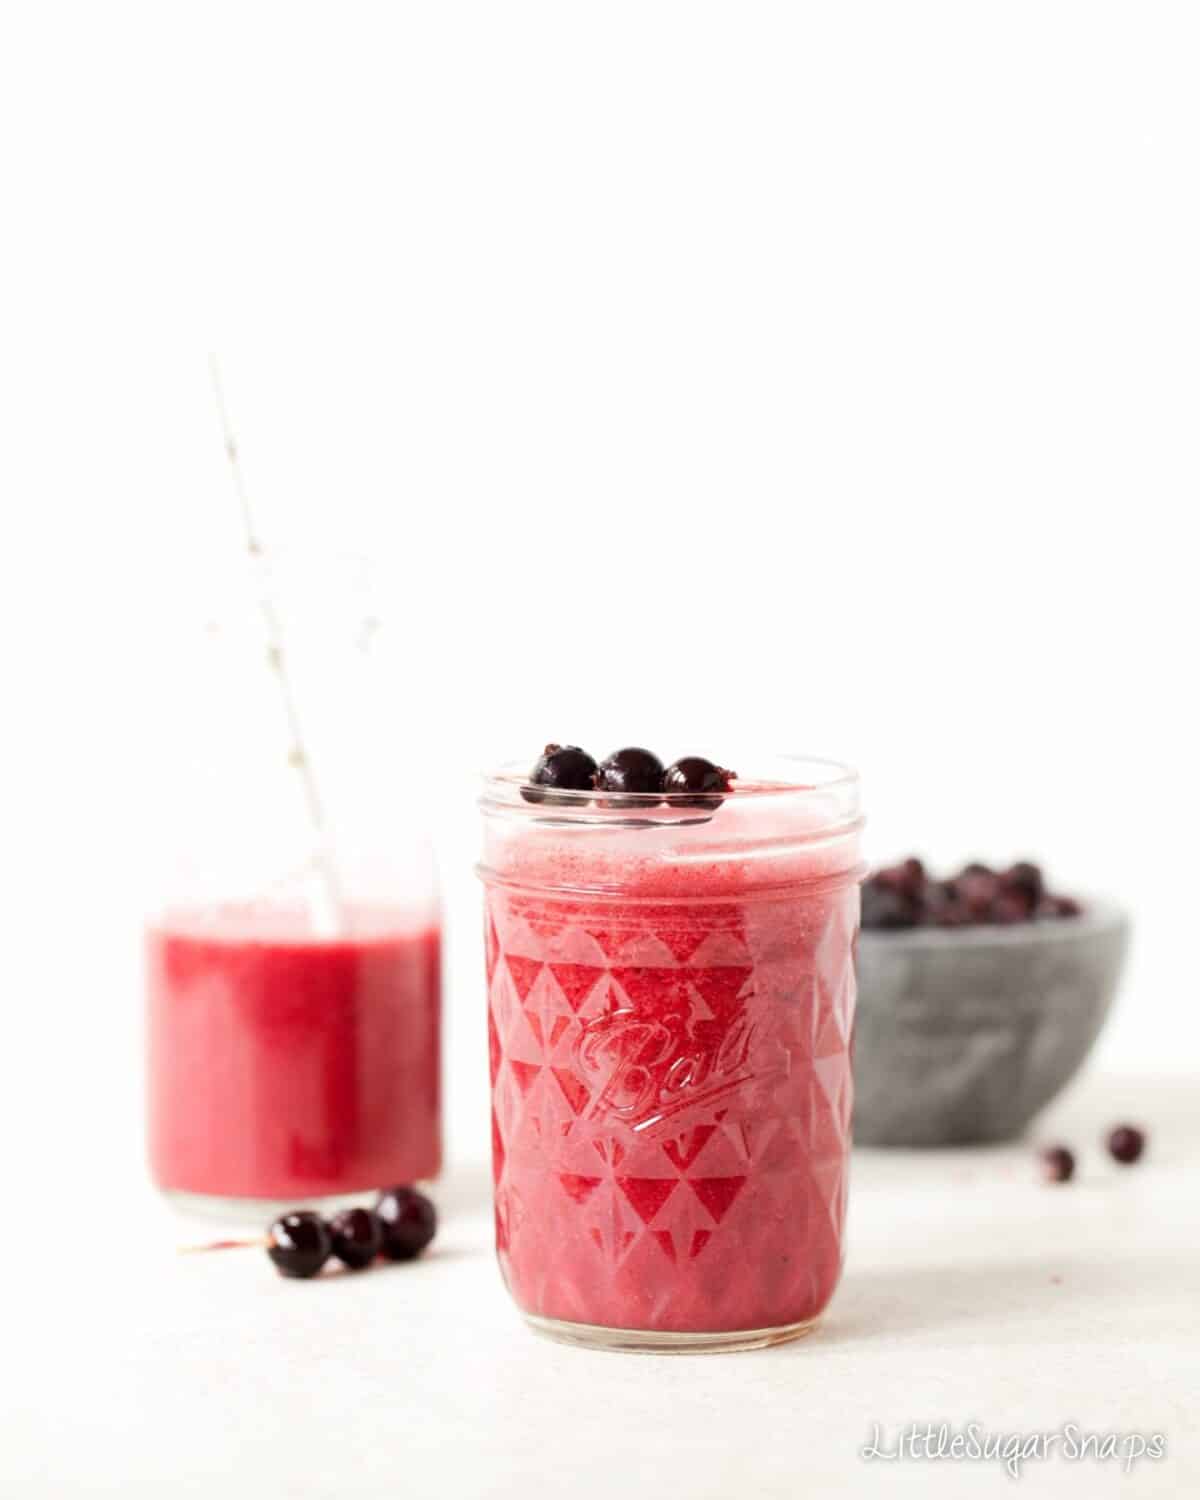 A Blackcurrant Smoothie in a jam jar glass.